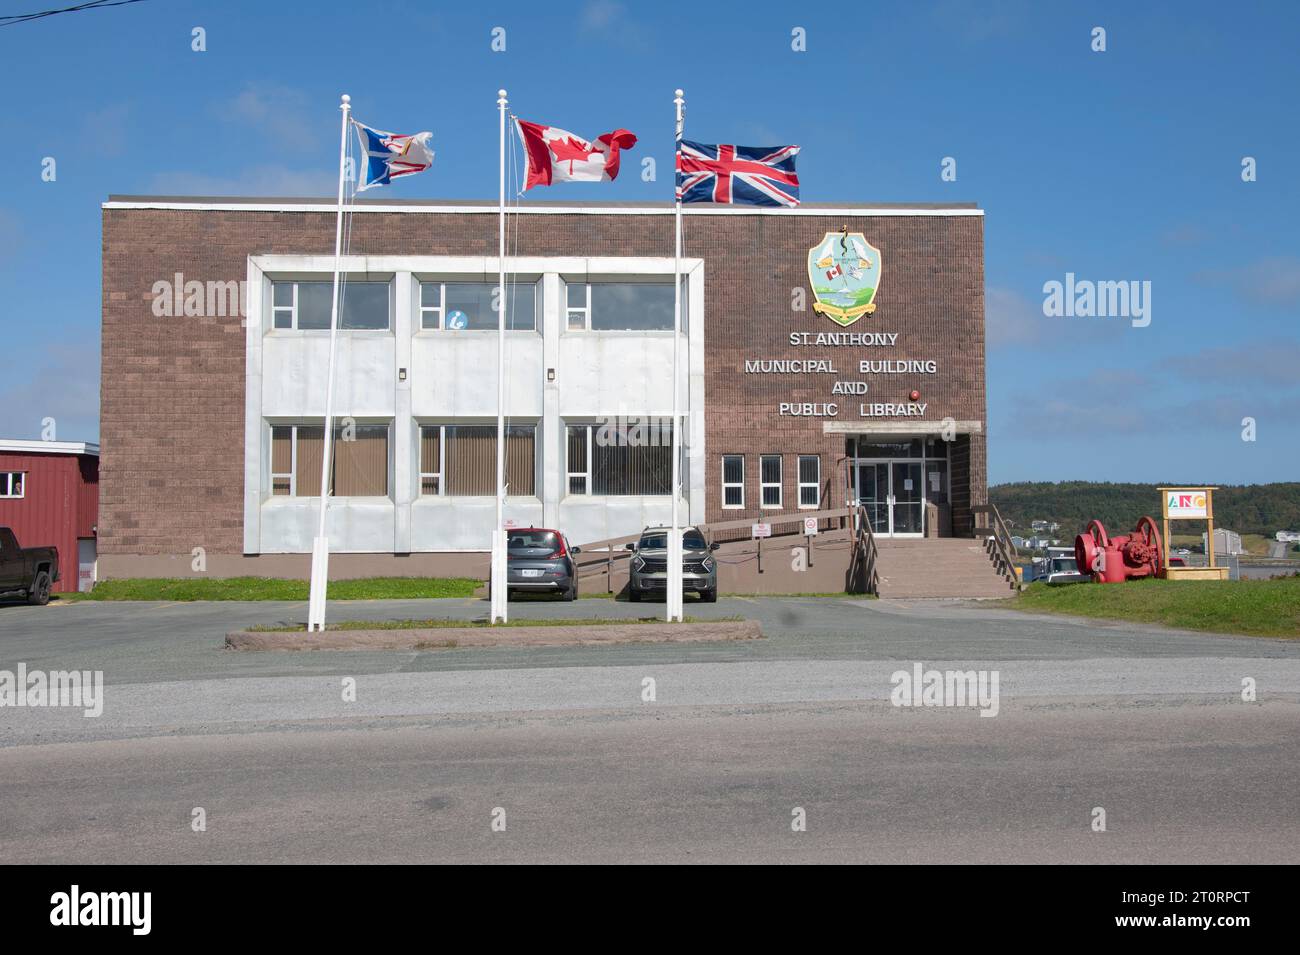 St. Anthony municipal building and library in Newfoundland & Labrador, Canada Stock Photo